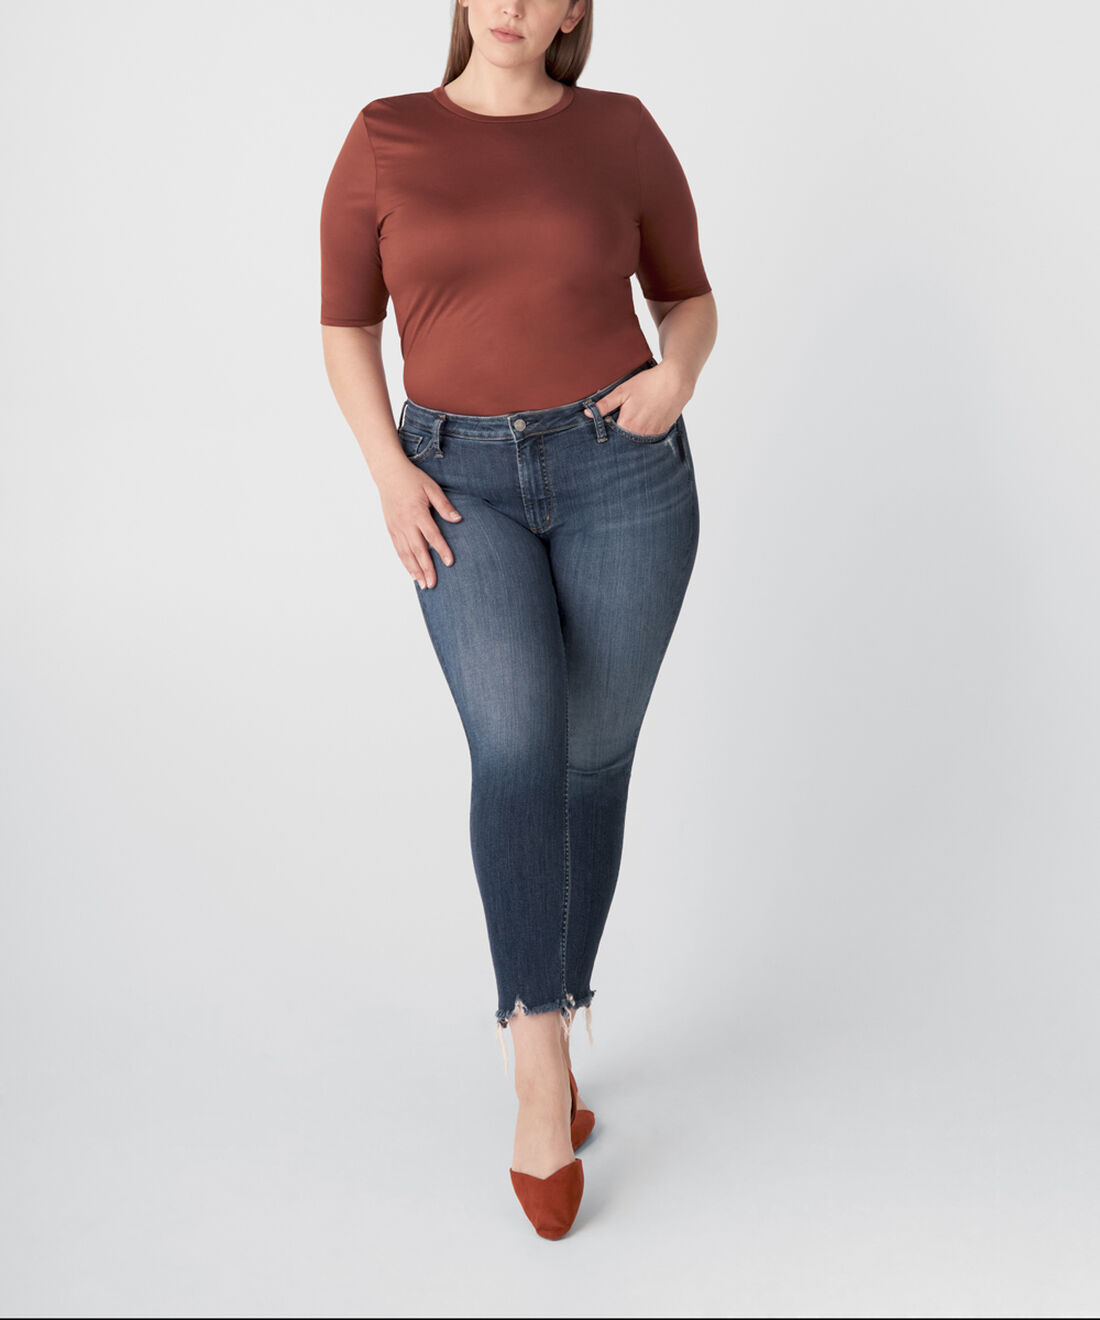 Most Wanted Mid Rise Skinny Jeans Plus Size Front